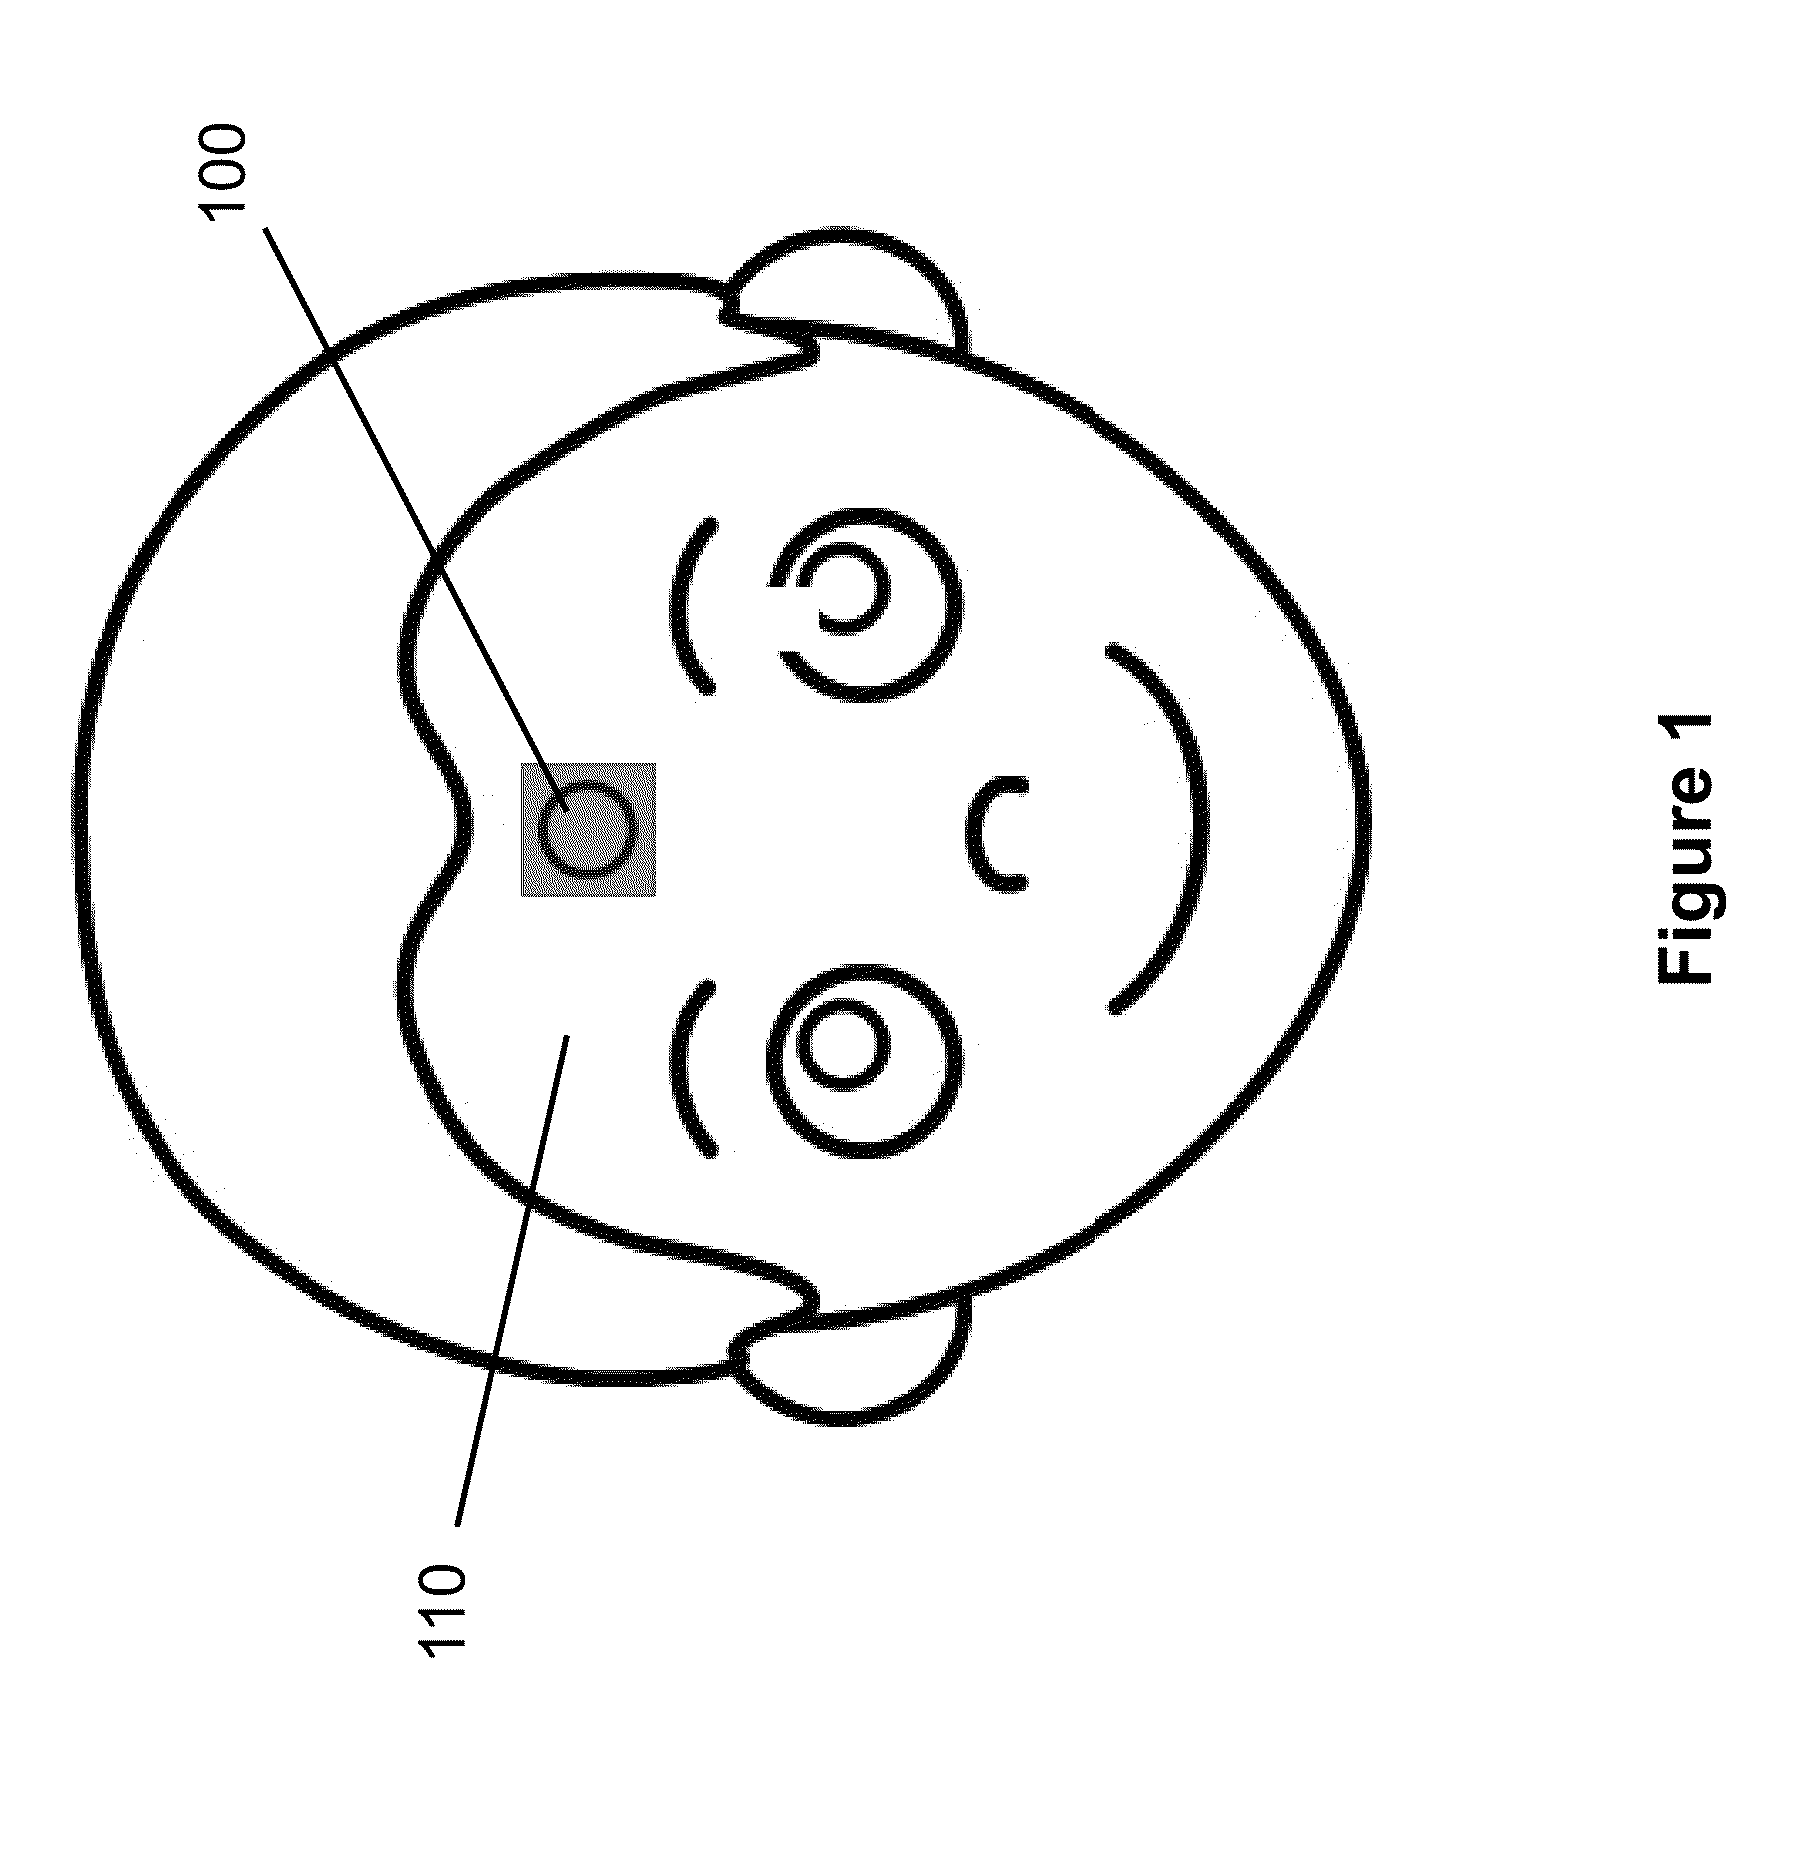 Stretchable electronic patch having a foldable circuit layer